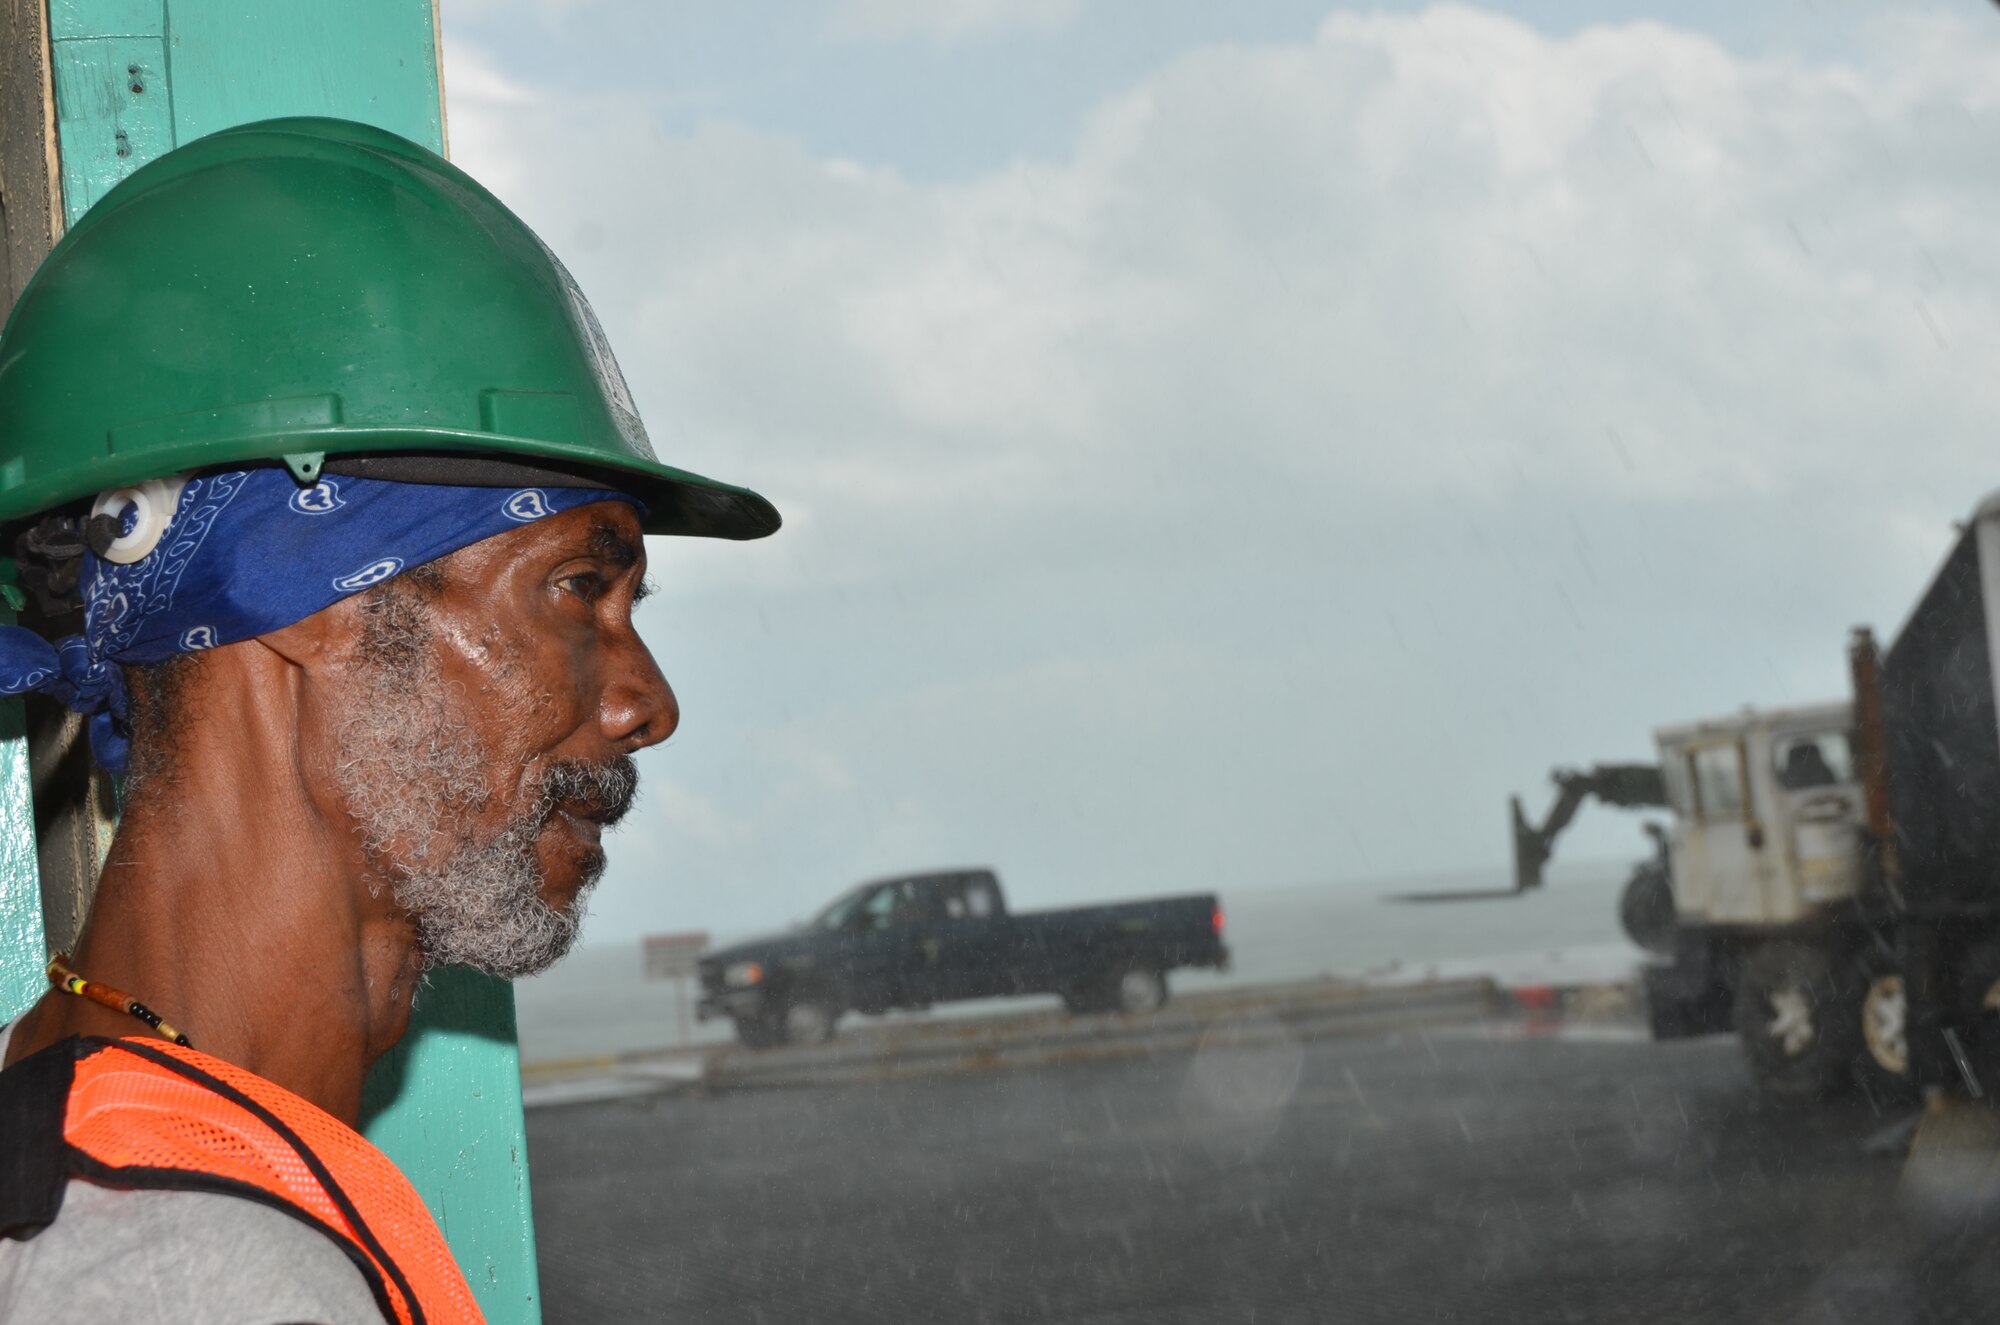 A Belizean contractor at the Port of Belize looks on as the downpour slows New Horizons equipment off-loading, March 8. The shipment, which left Cape Canaveral, Fla., March 1, included various construction and maintenance vehicles (tractor trailers, dump trucks, excavators, pickups, forklifts, backhoes and gas trucks) and a variety of shipping containers that will be used to support exercise requirements.